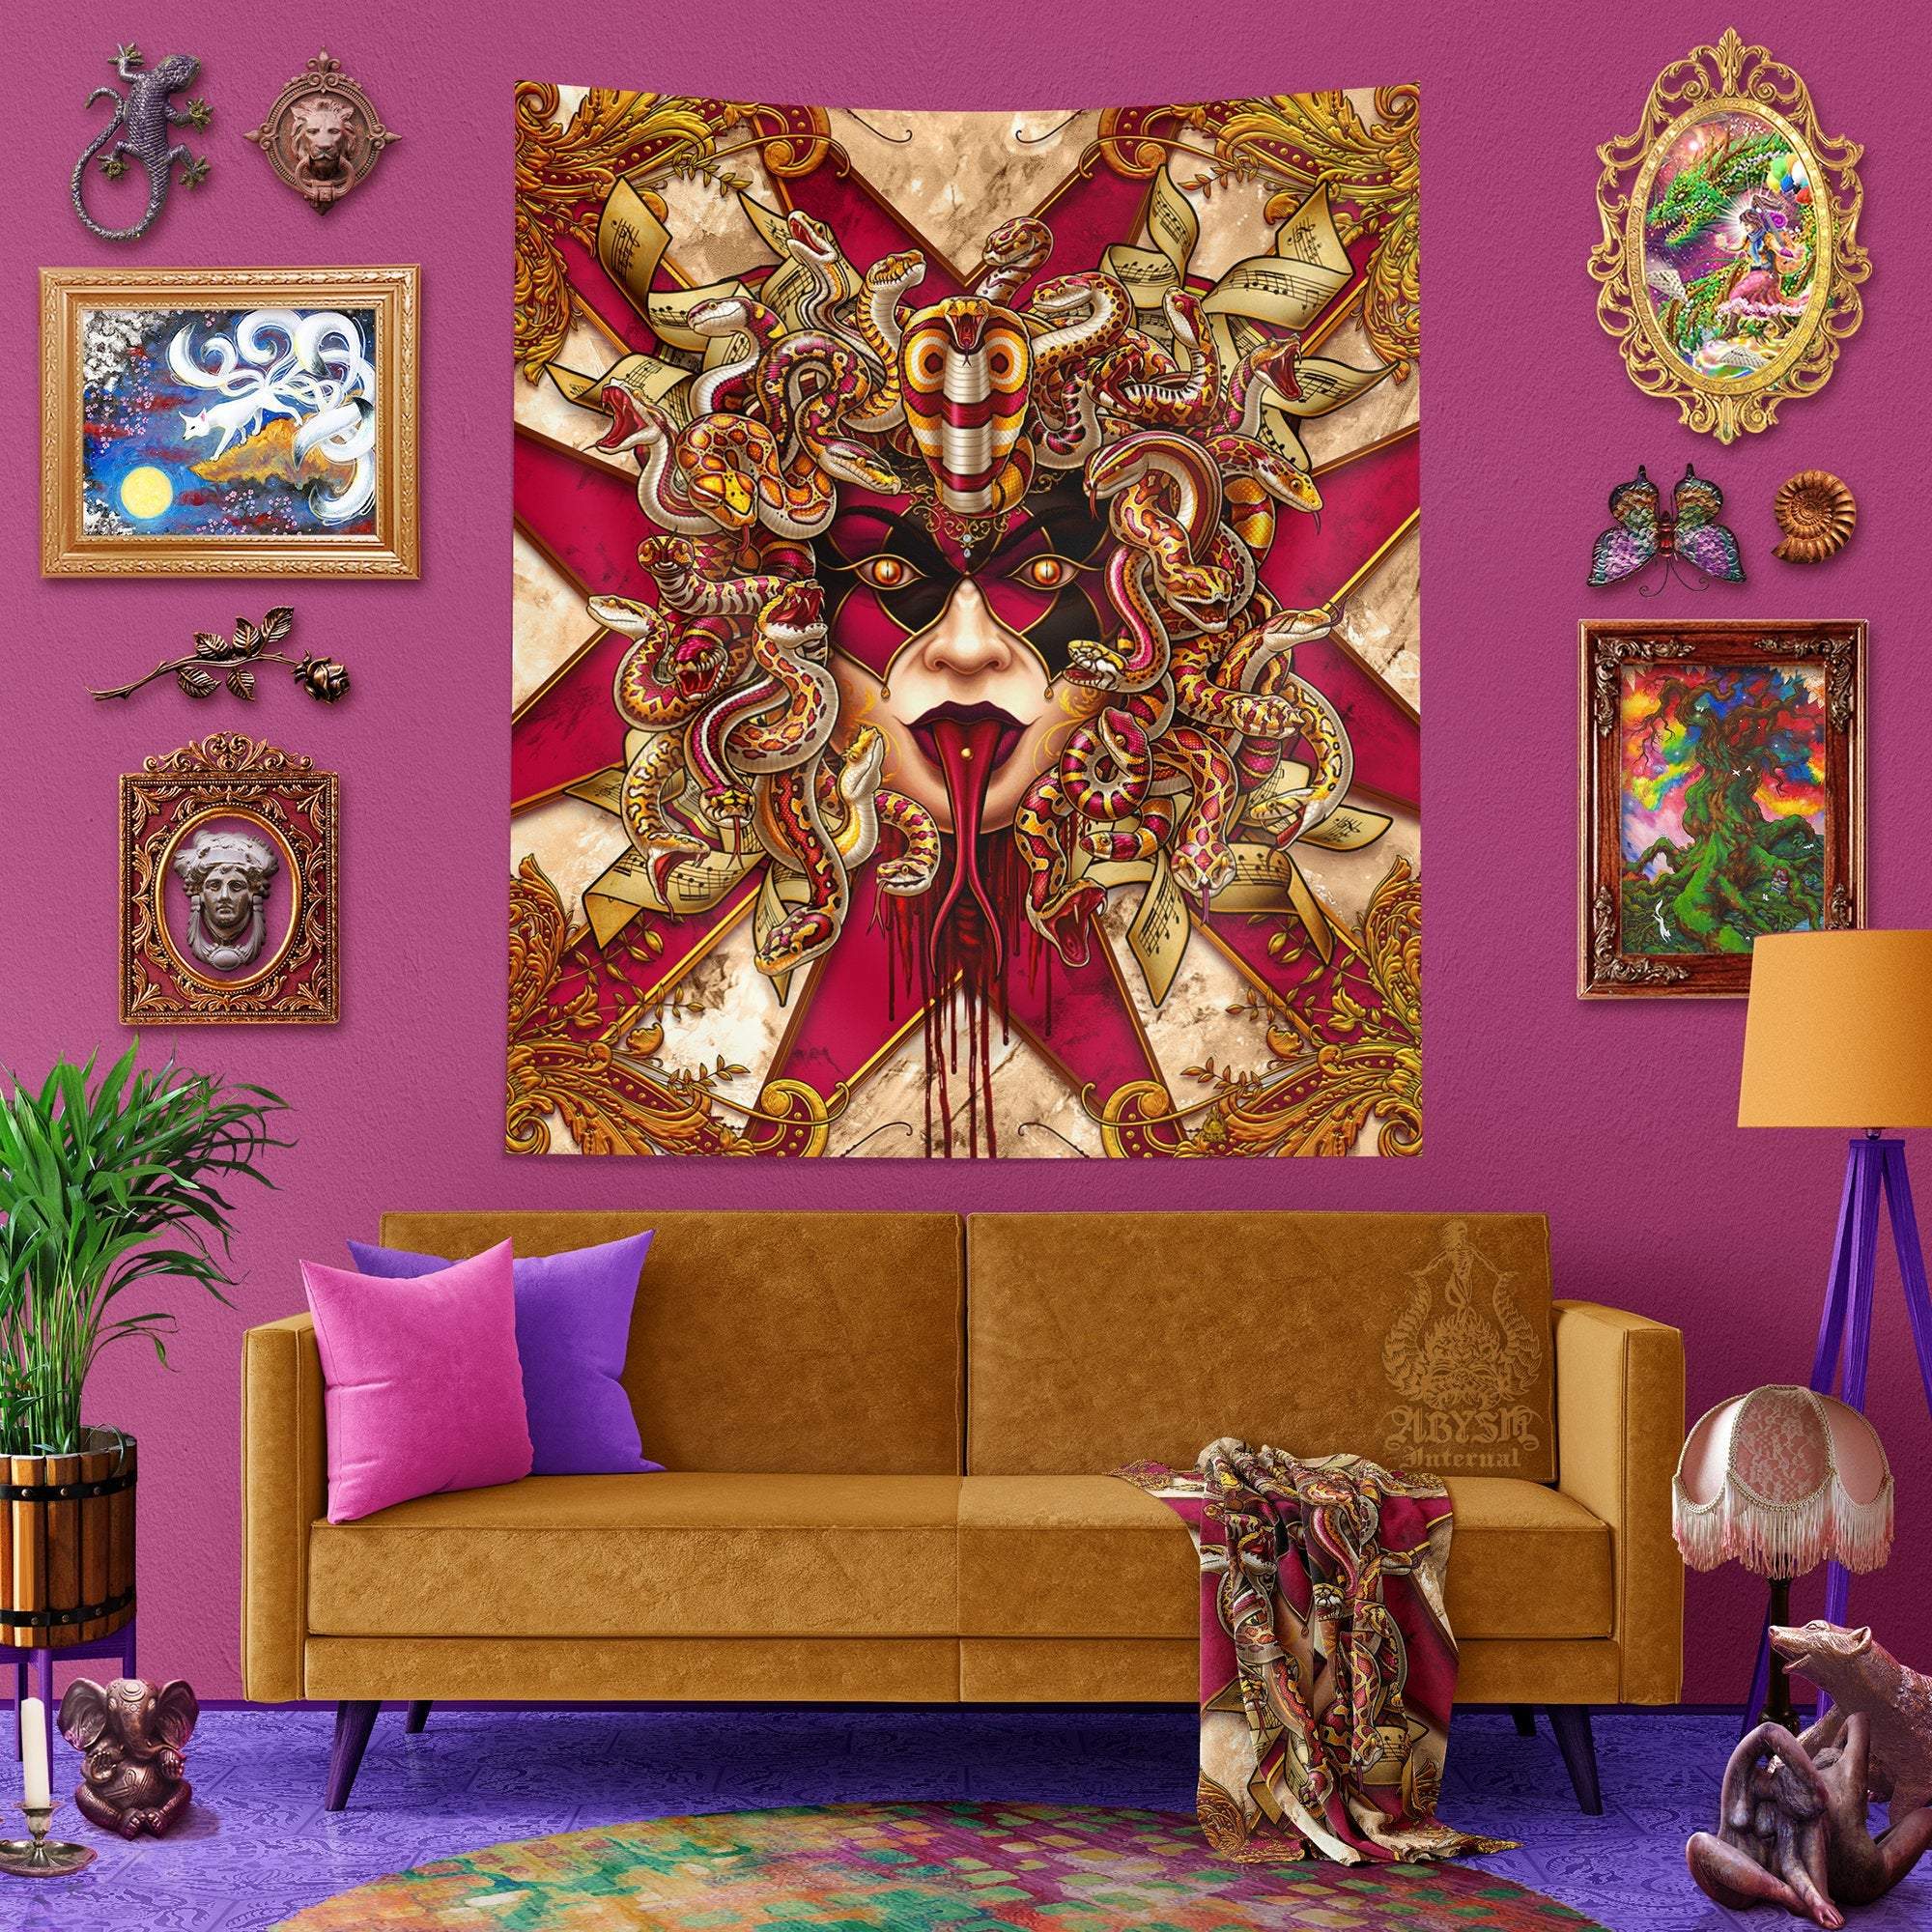 Medusa Tapestry, Venice Carnival Wall Hanging, Eclectic Home Decor, Art Print - Pink Harlequin & Gold Snakes, 3 Faces - Abysm Internal